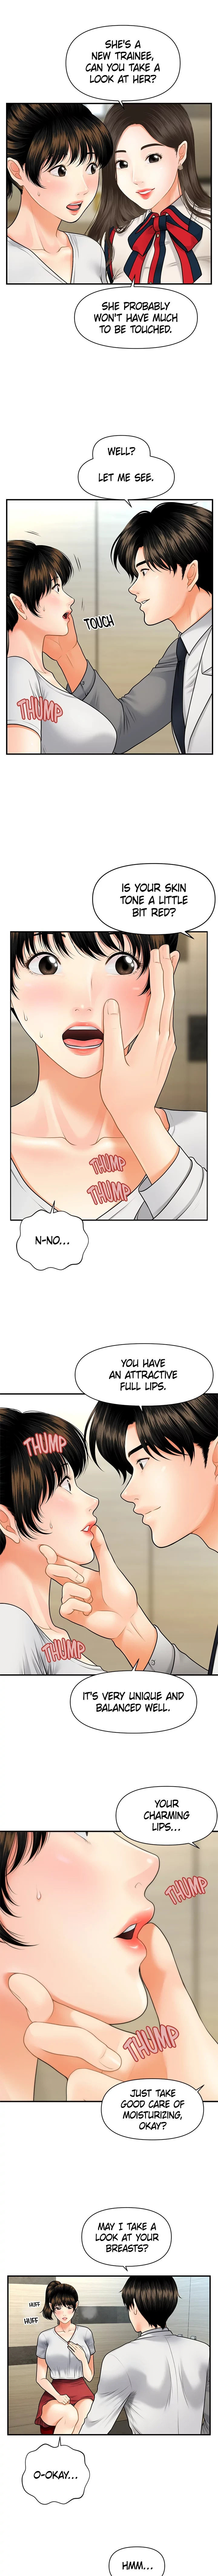 You’re so Handsome - Chapter 9 Page 9